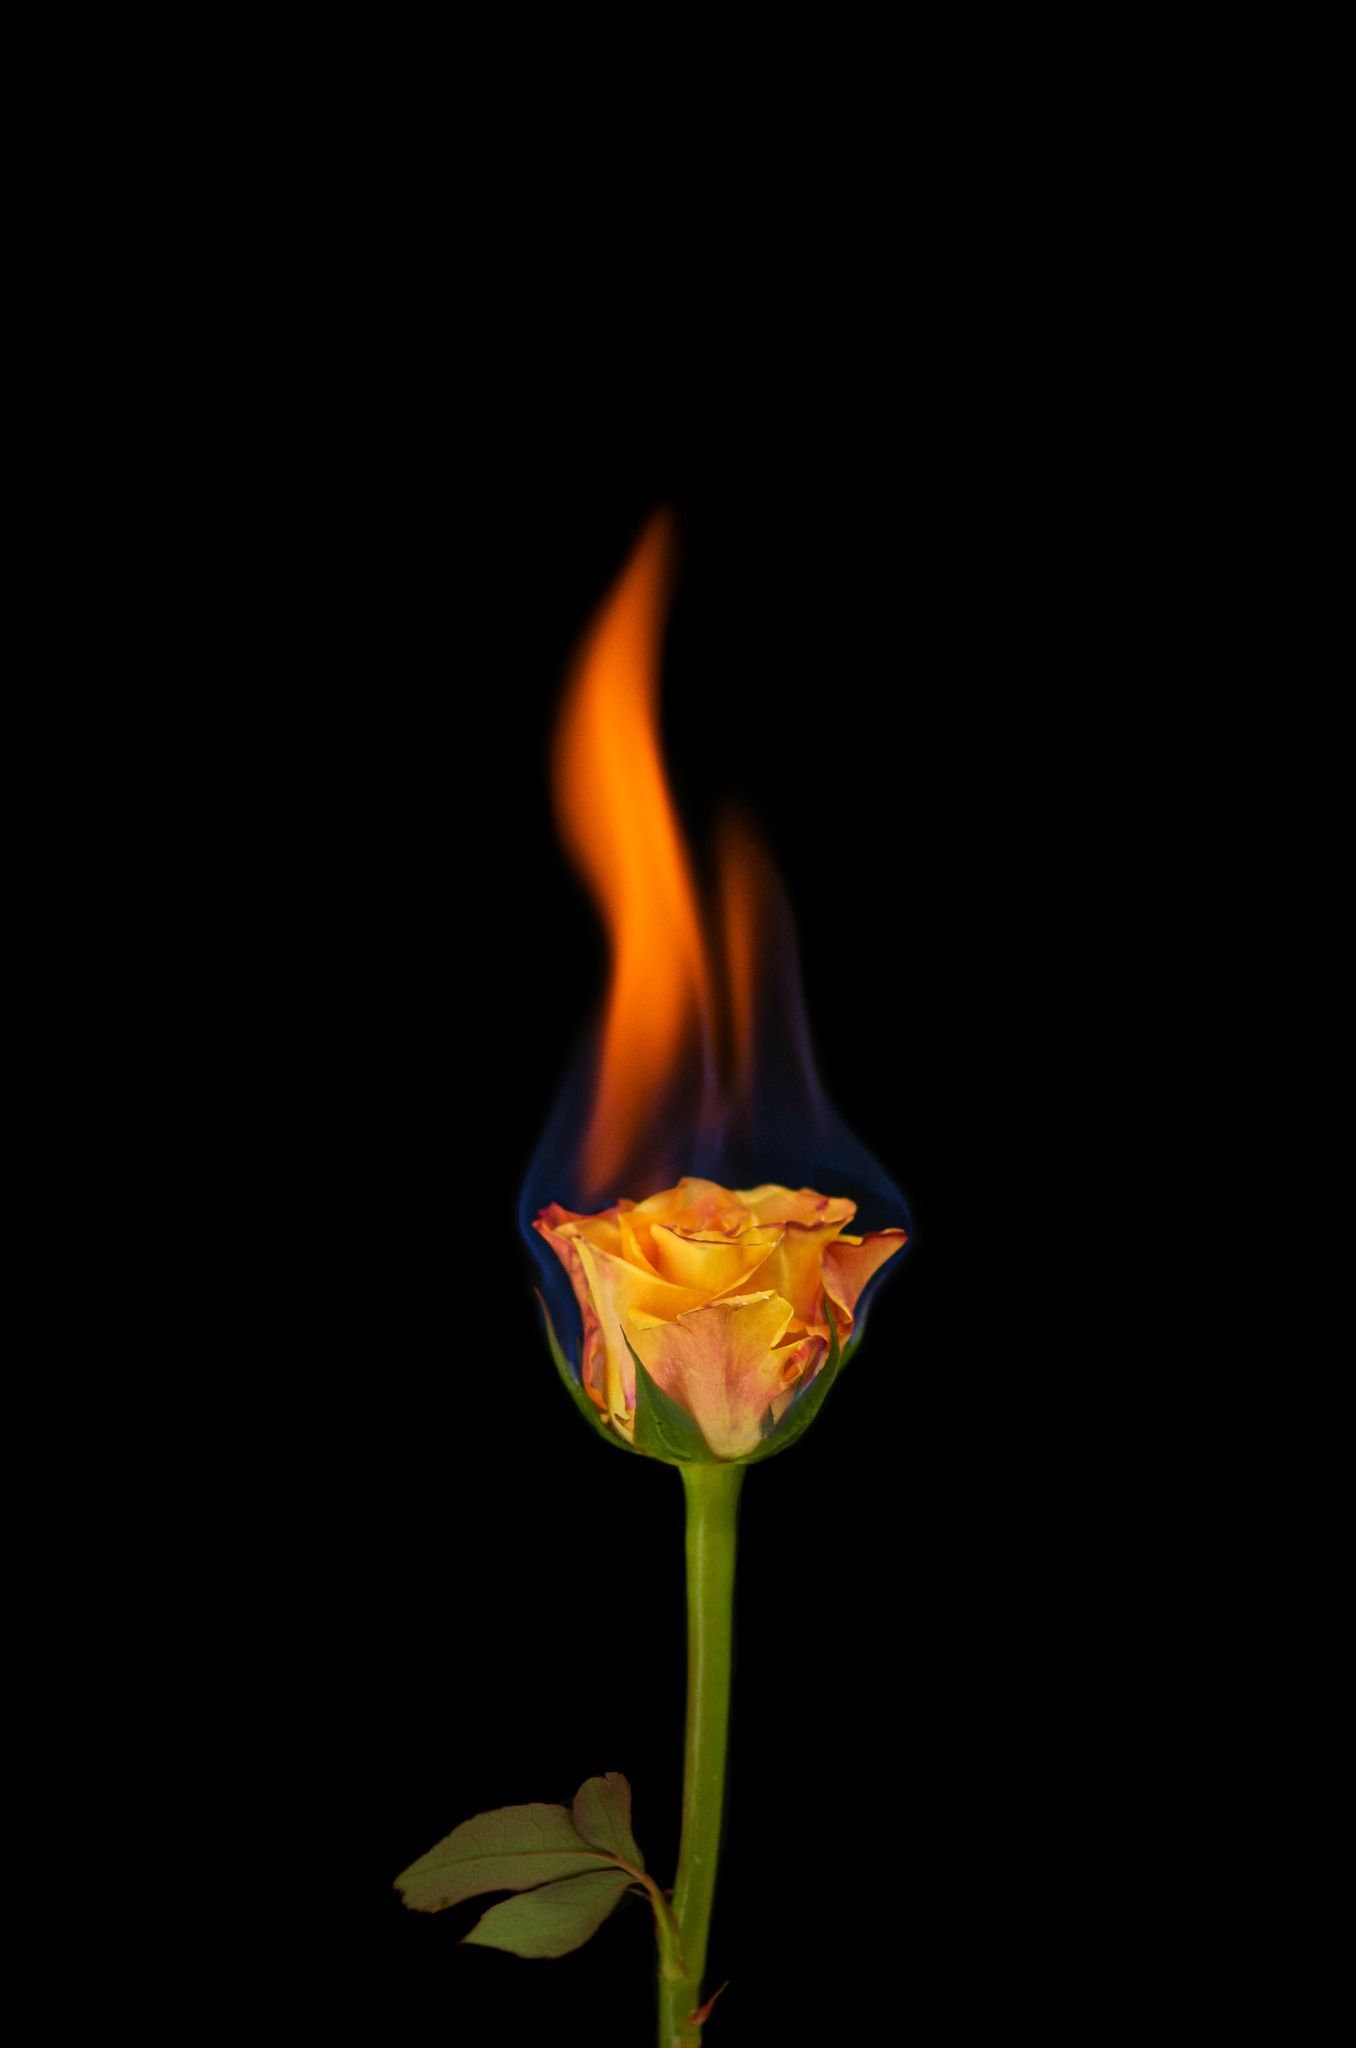 roses Rose on fire